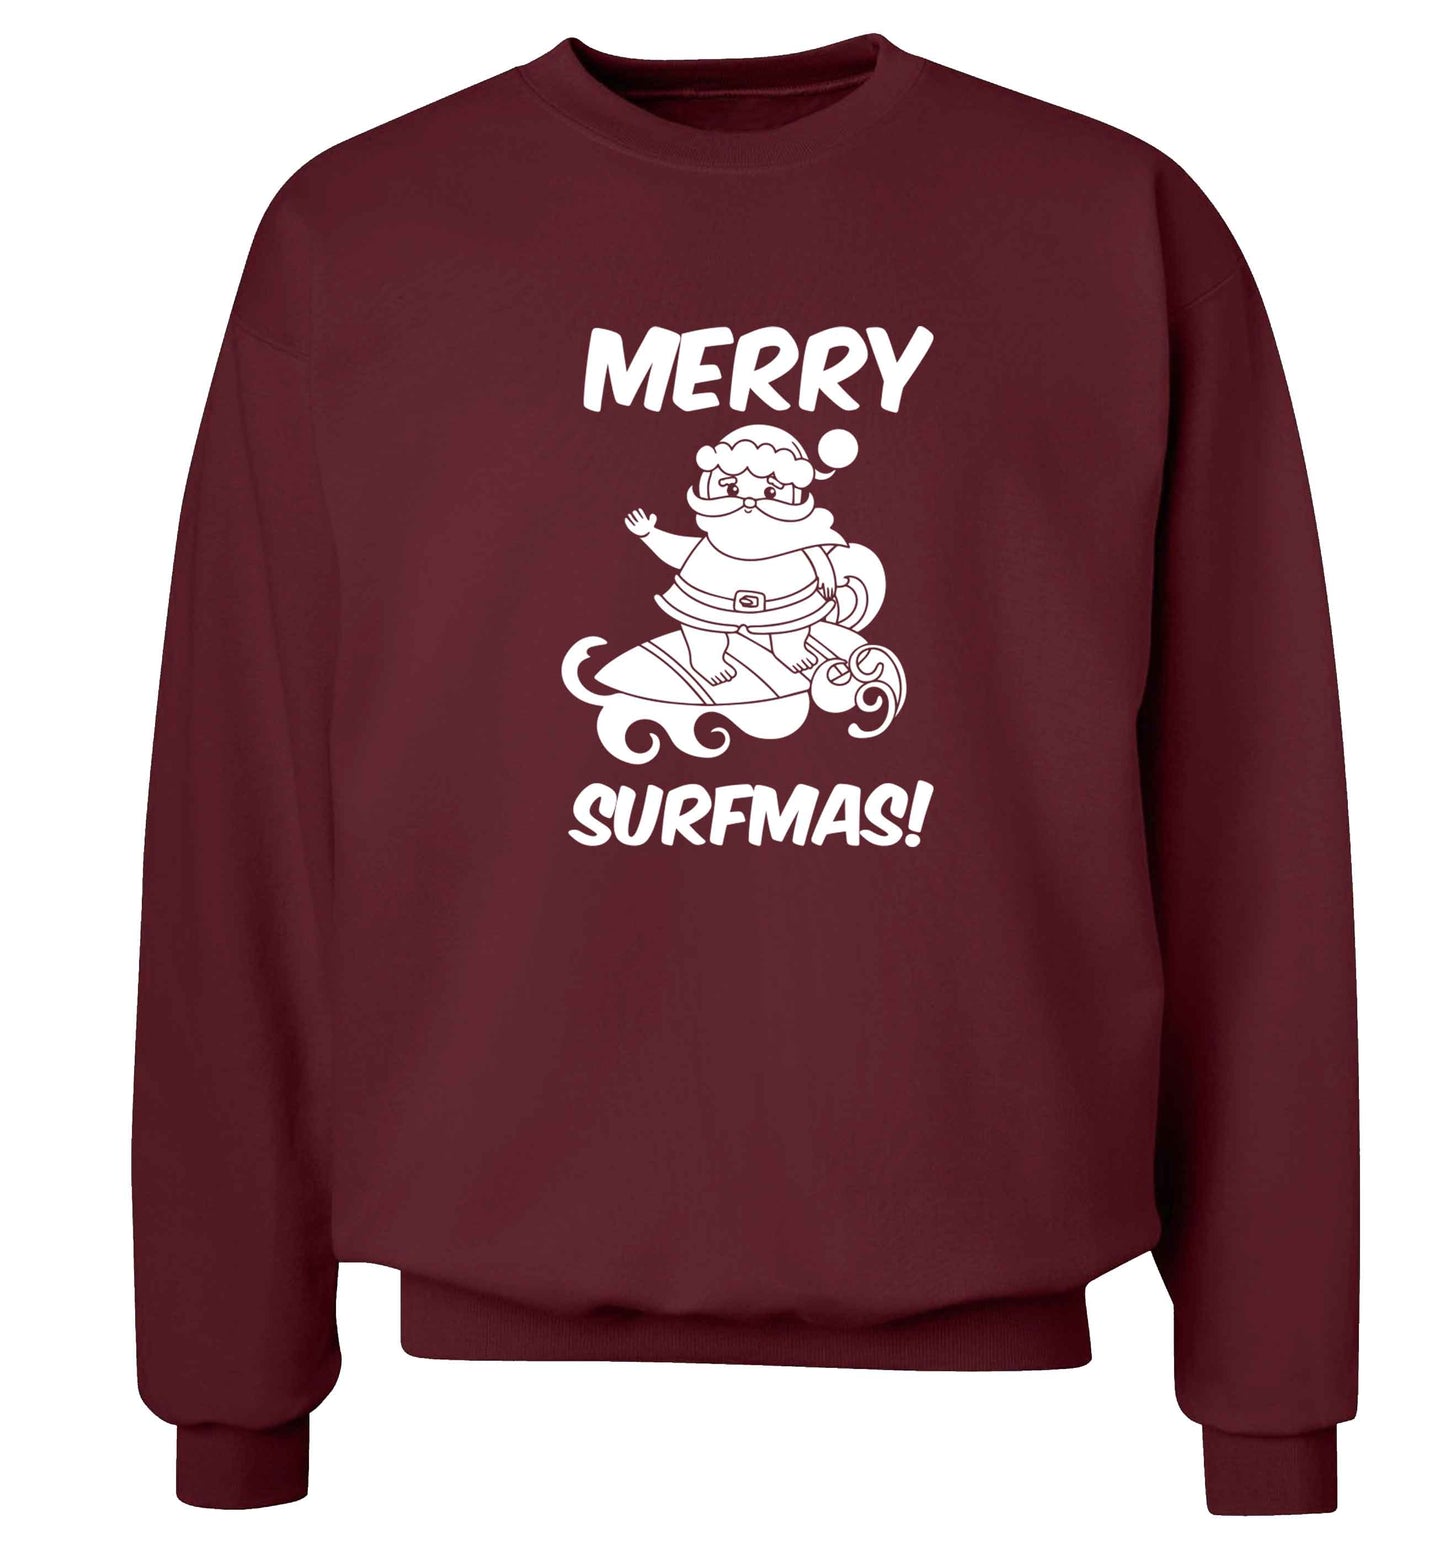 Daddy Christmas Kisses Overseas adult's unisex maroon sweater 2XL